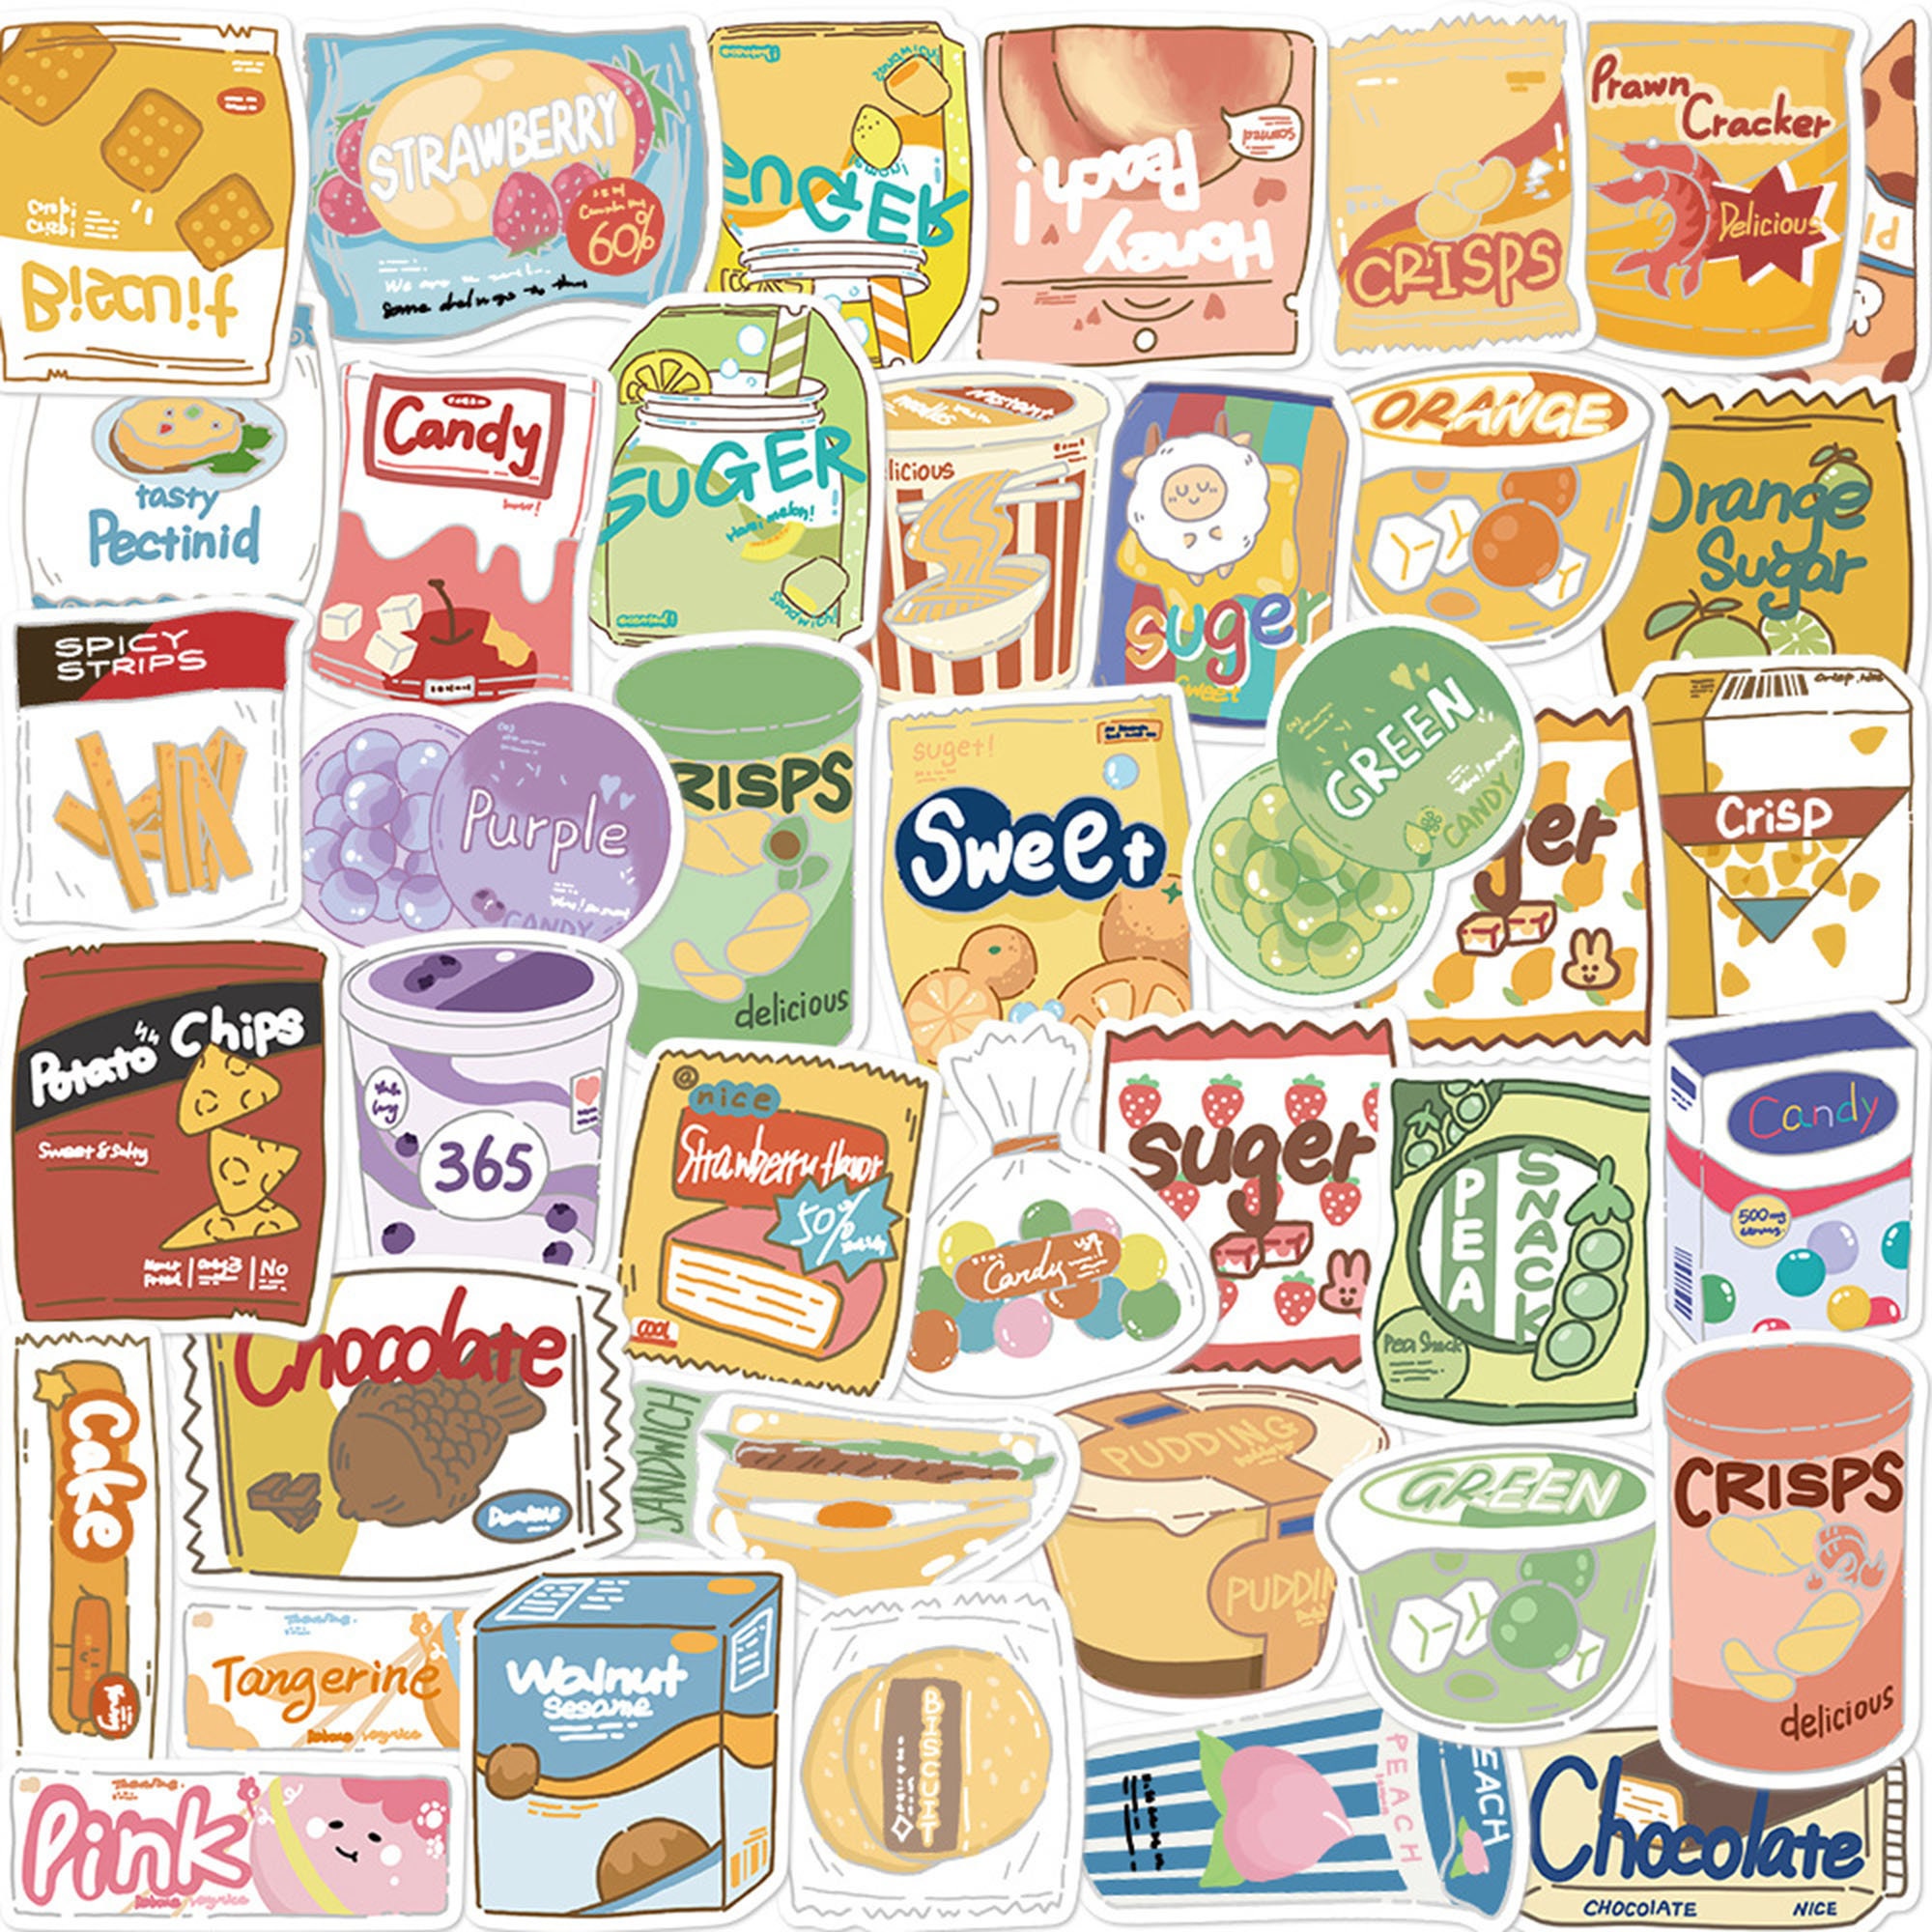 50pcs Kawaii Food Stickers for Kids Teens and Adults, Cute Snack Stickers  Decals for Journaling and Scrapbooking, Waterproof Vinyl Cartoon Stickers